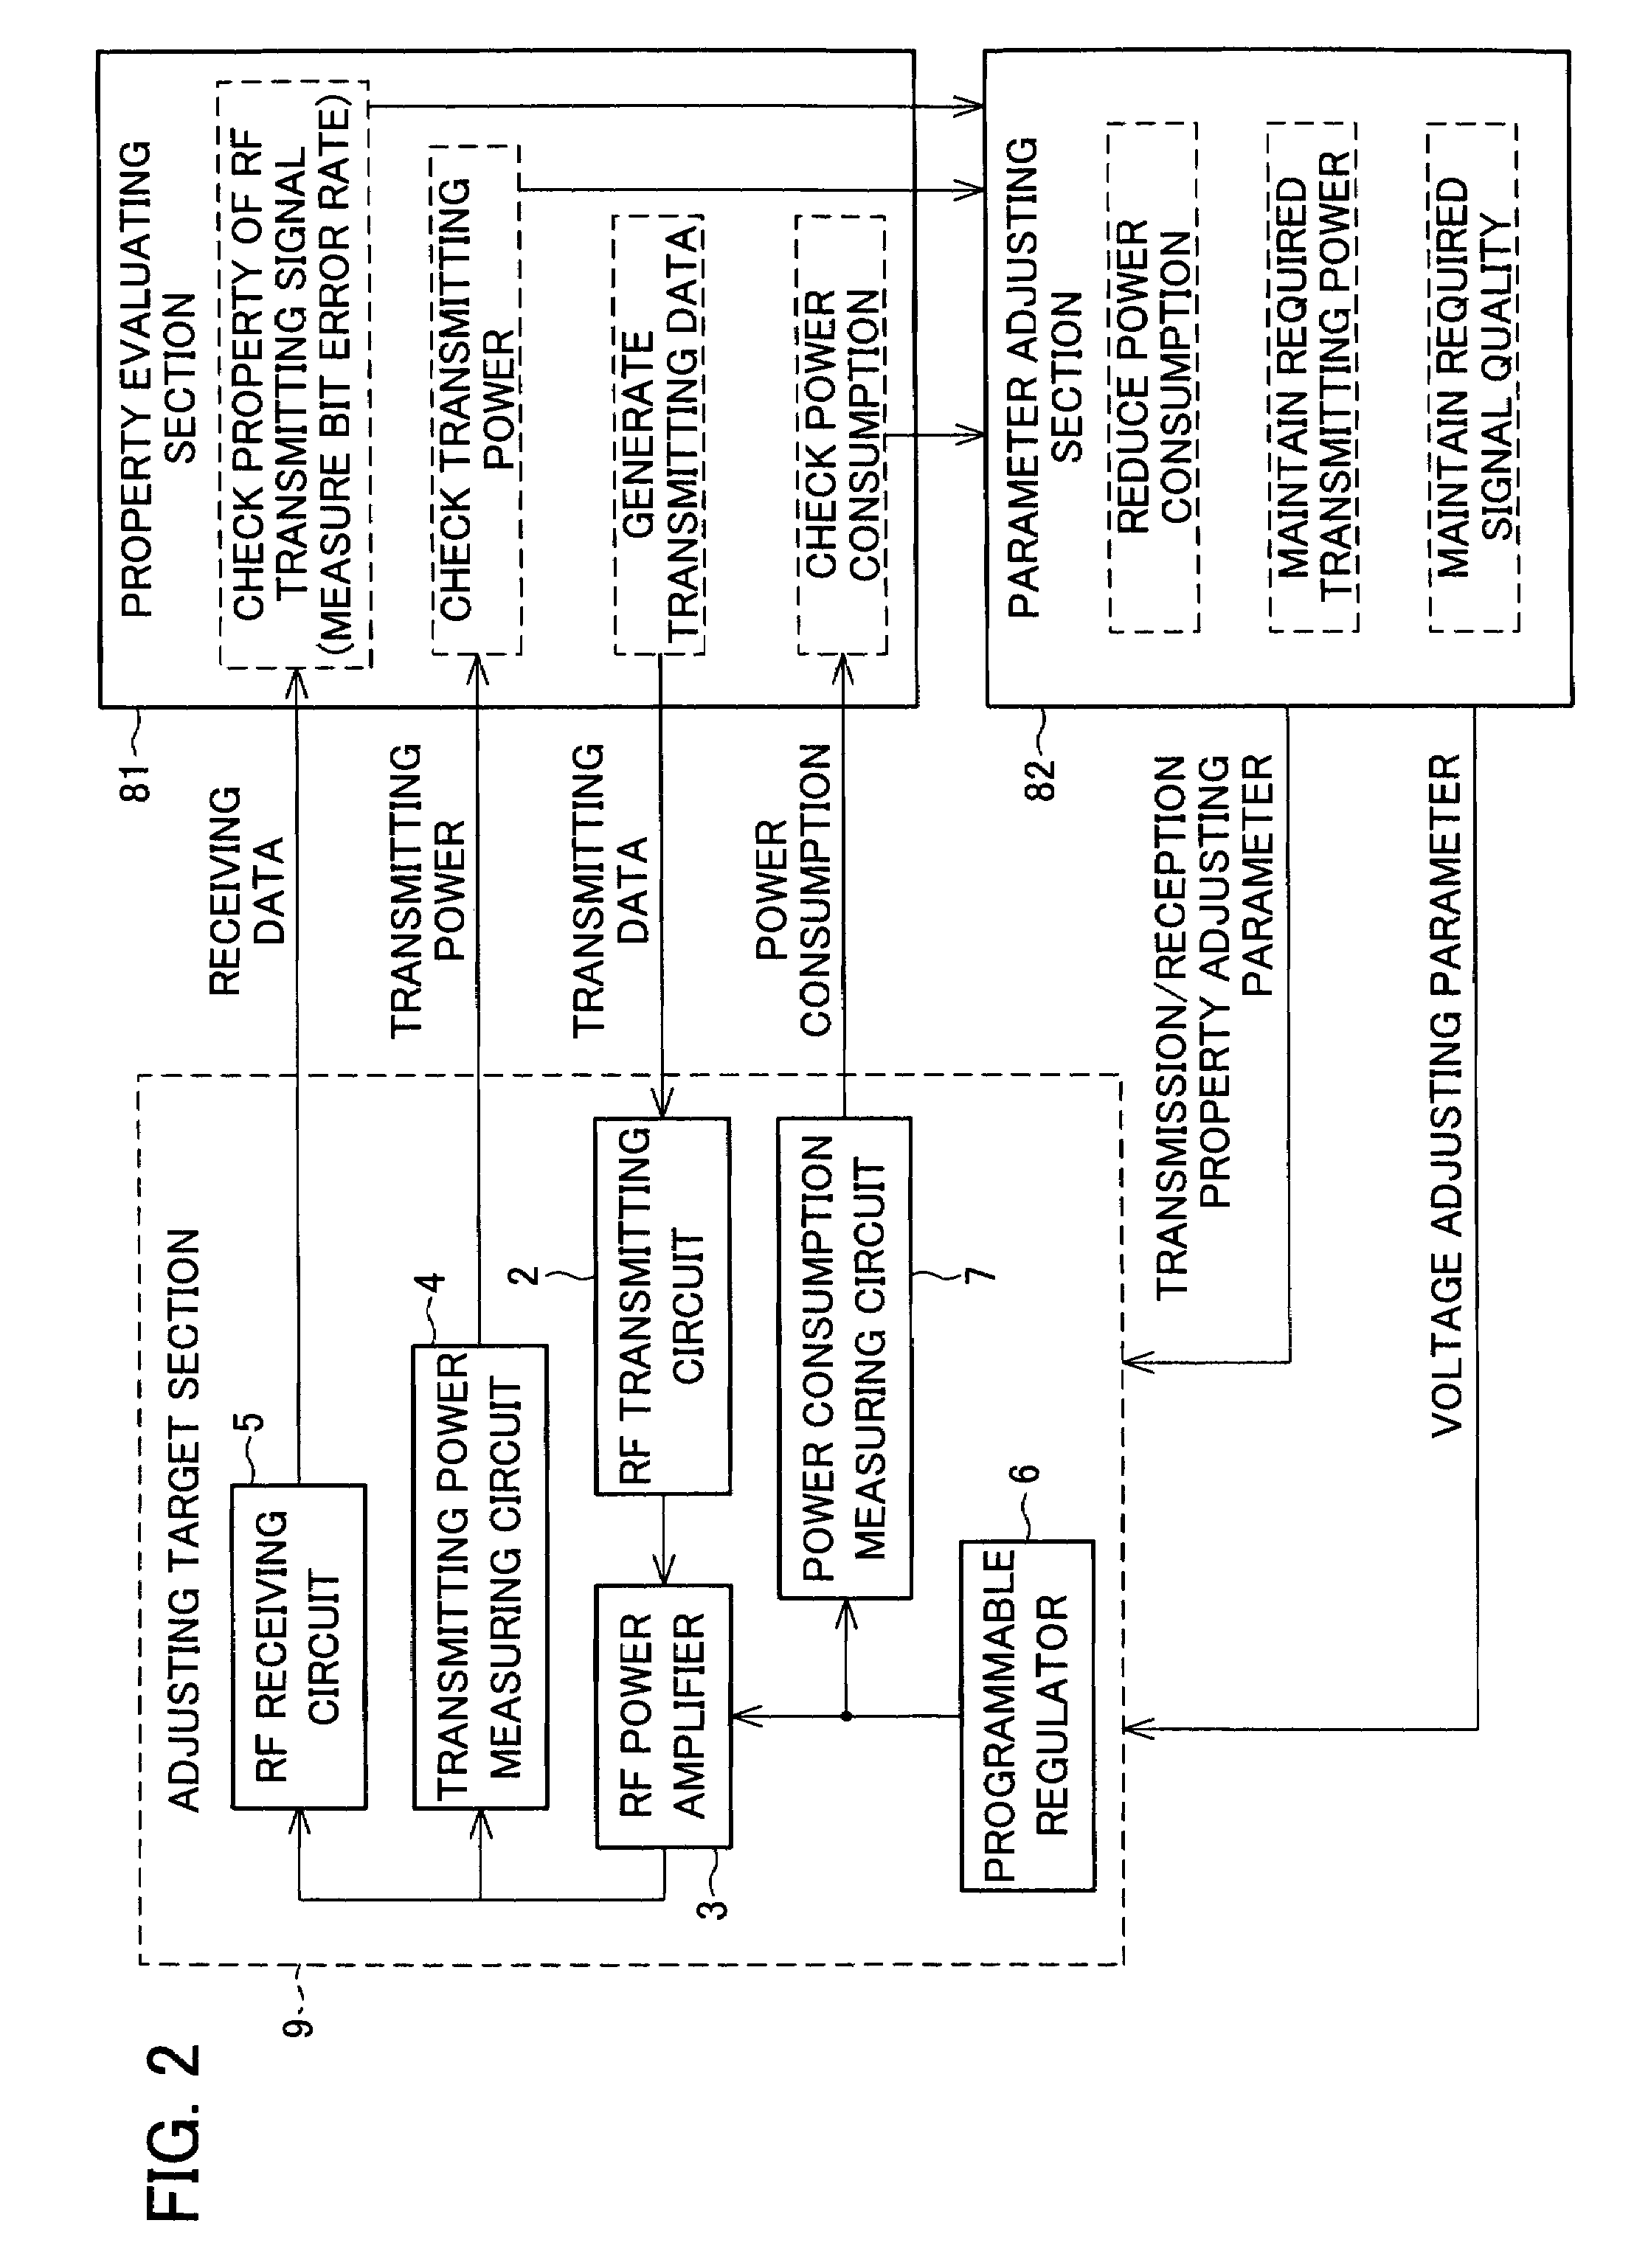 Power consumption controlling apparatus for high frequency amplifier